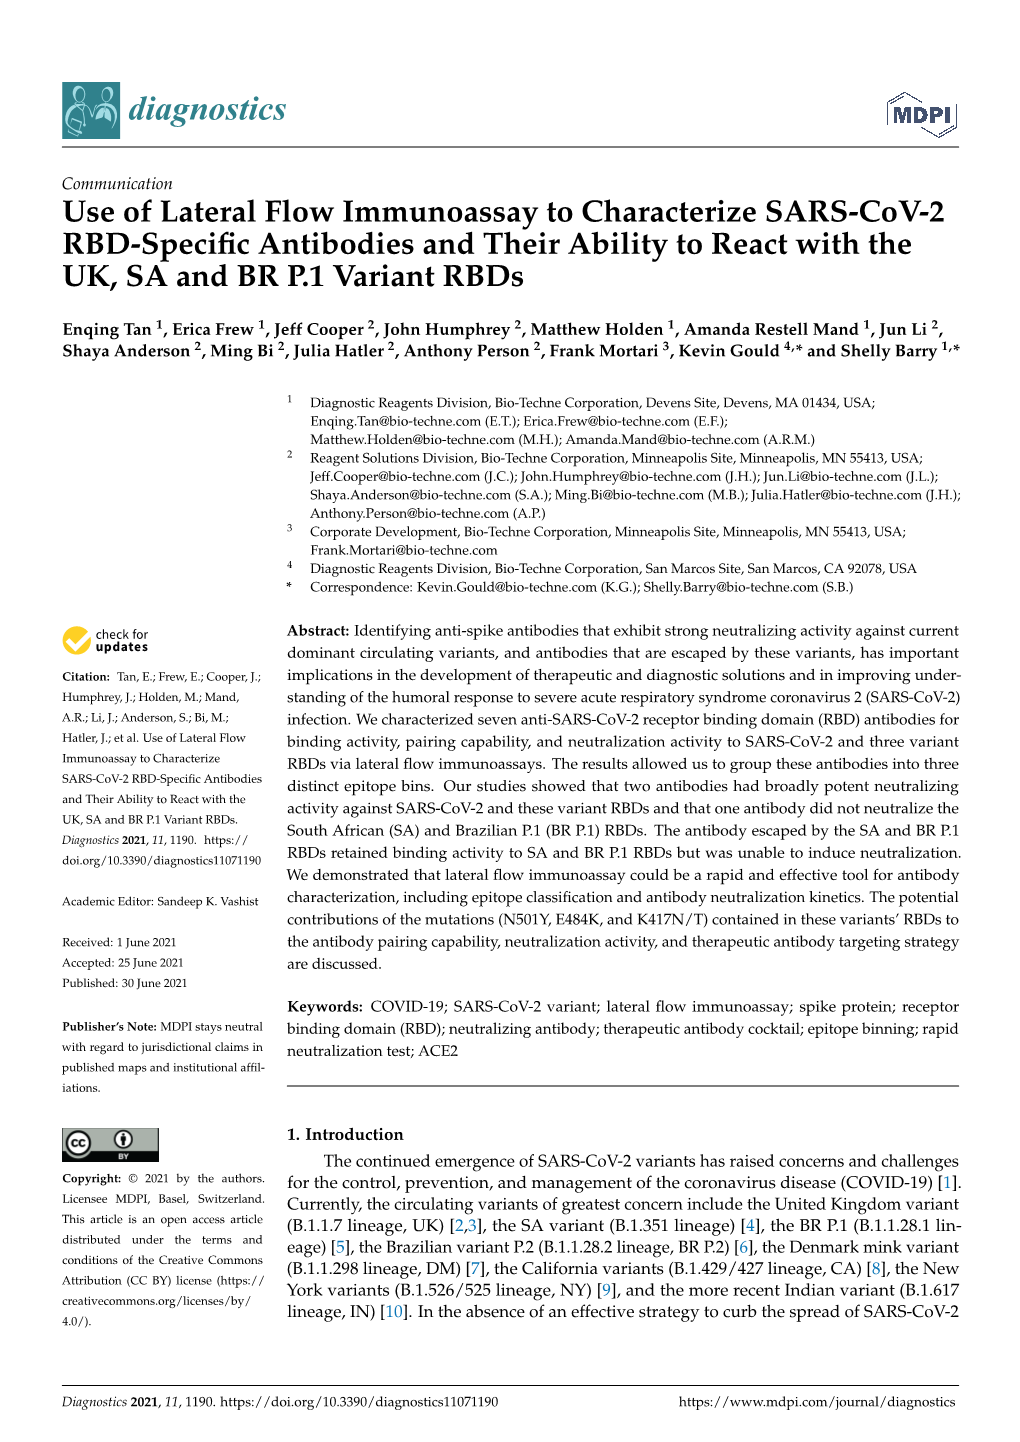 Use of Lateral Flow Immunoassay to Characterize SARS-Cov-2 RBD-Speciﬁc Antibodies and Their Ability to React with the UK, SA and BR P.1 Variant Rbds